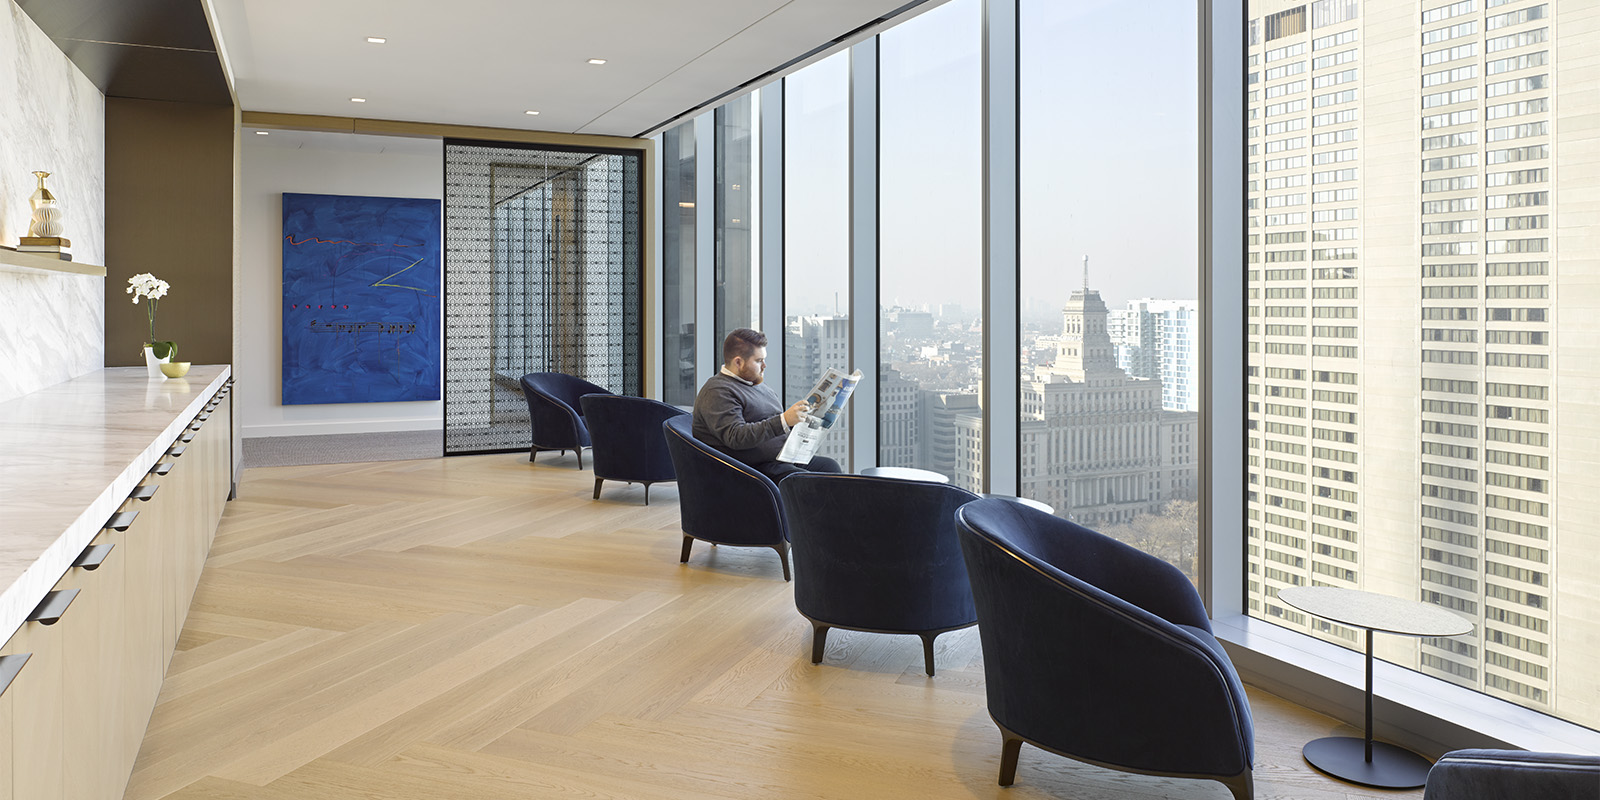 OMERS office seating area with upholstered chairs and large windows